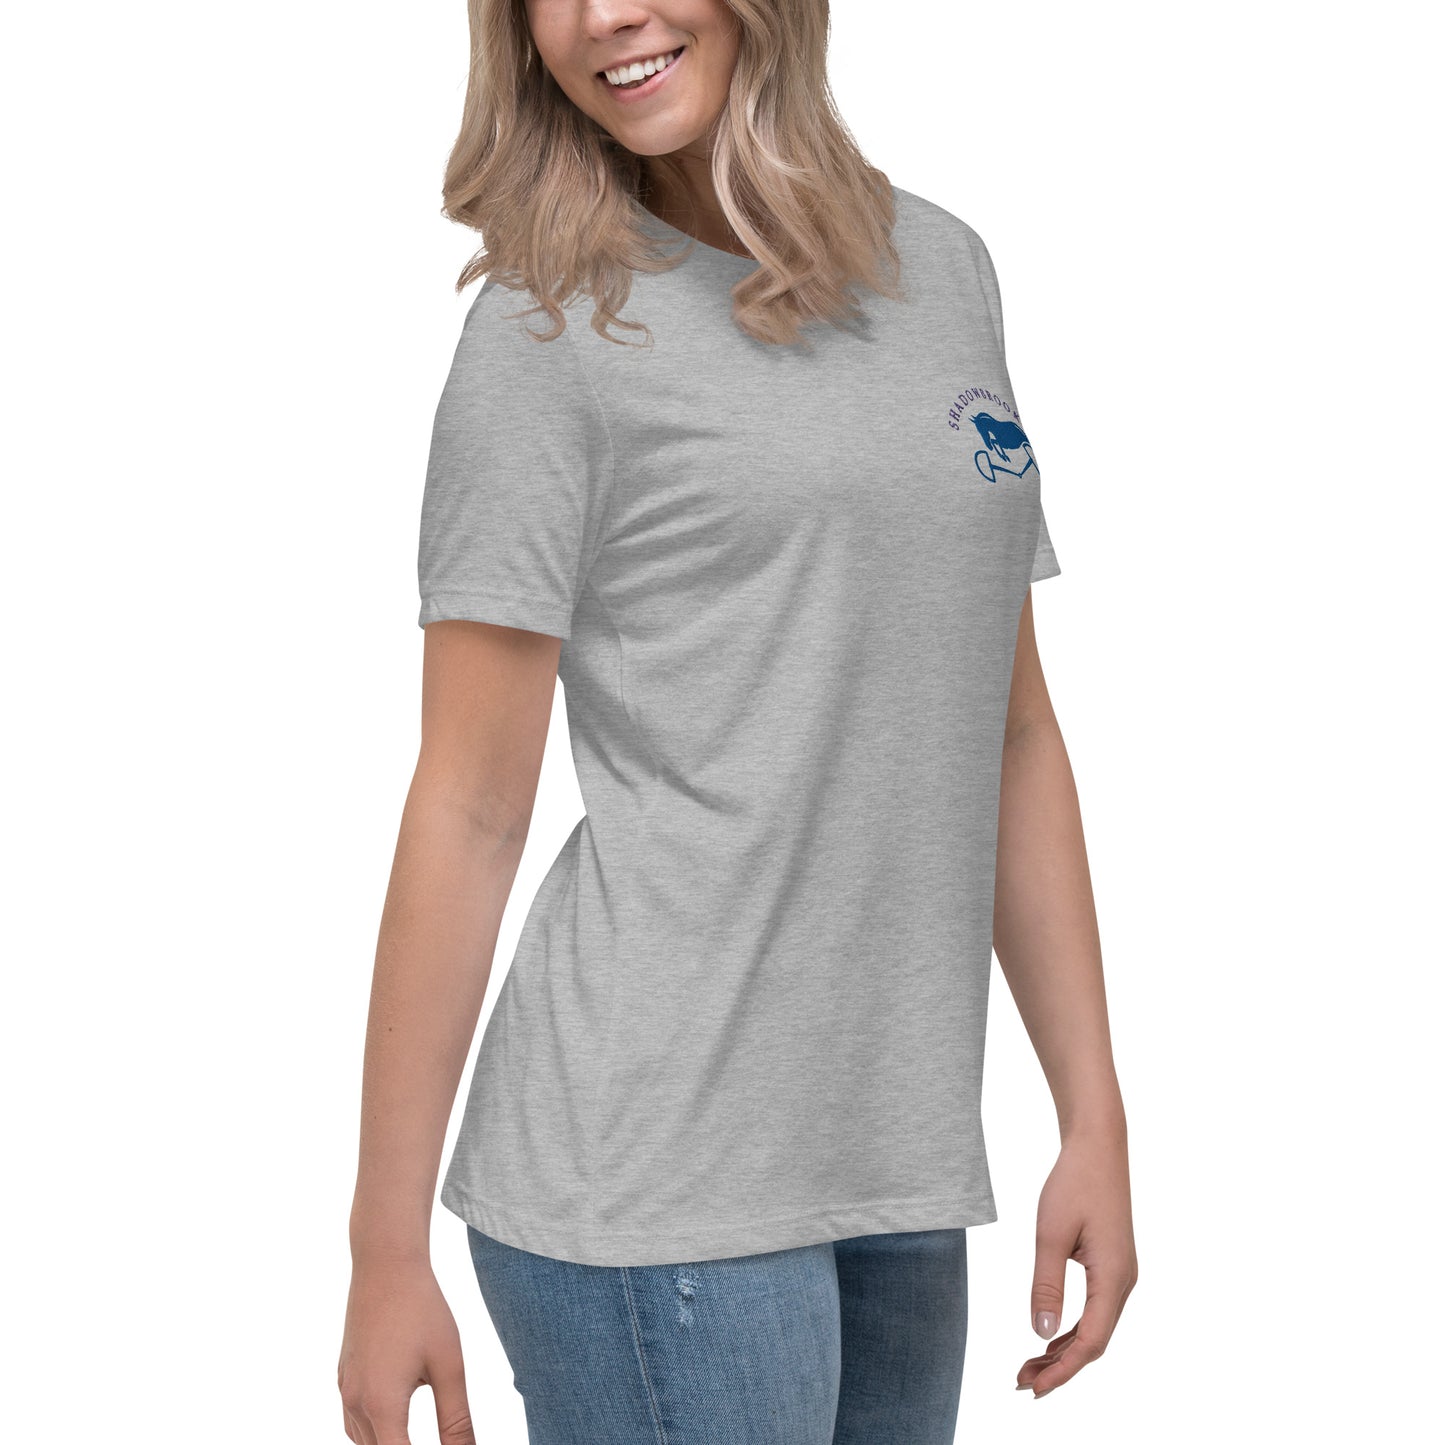 Shadowbrook Stables Light Grey T-Shirt - Small Logo Front